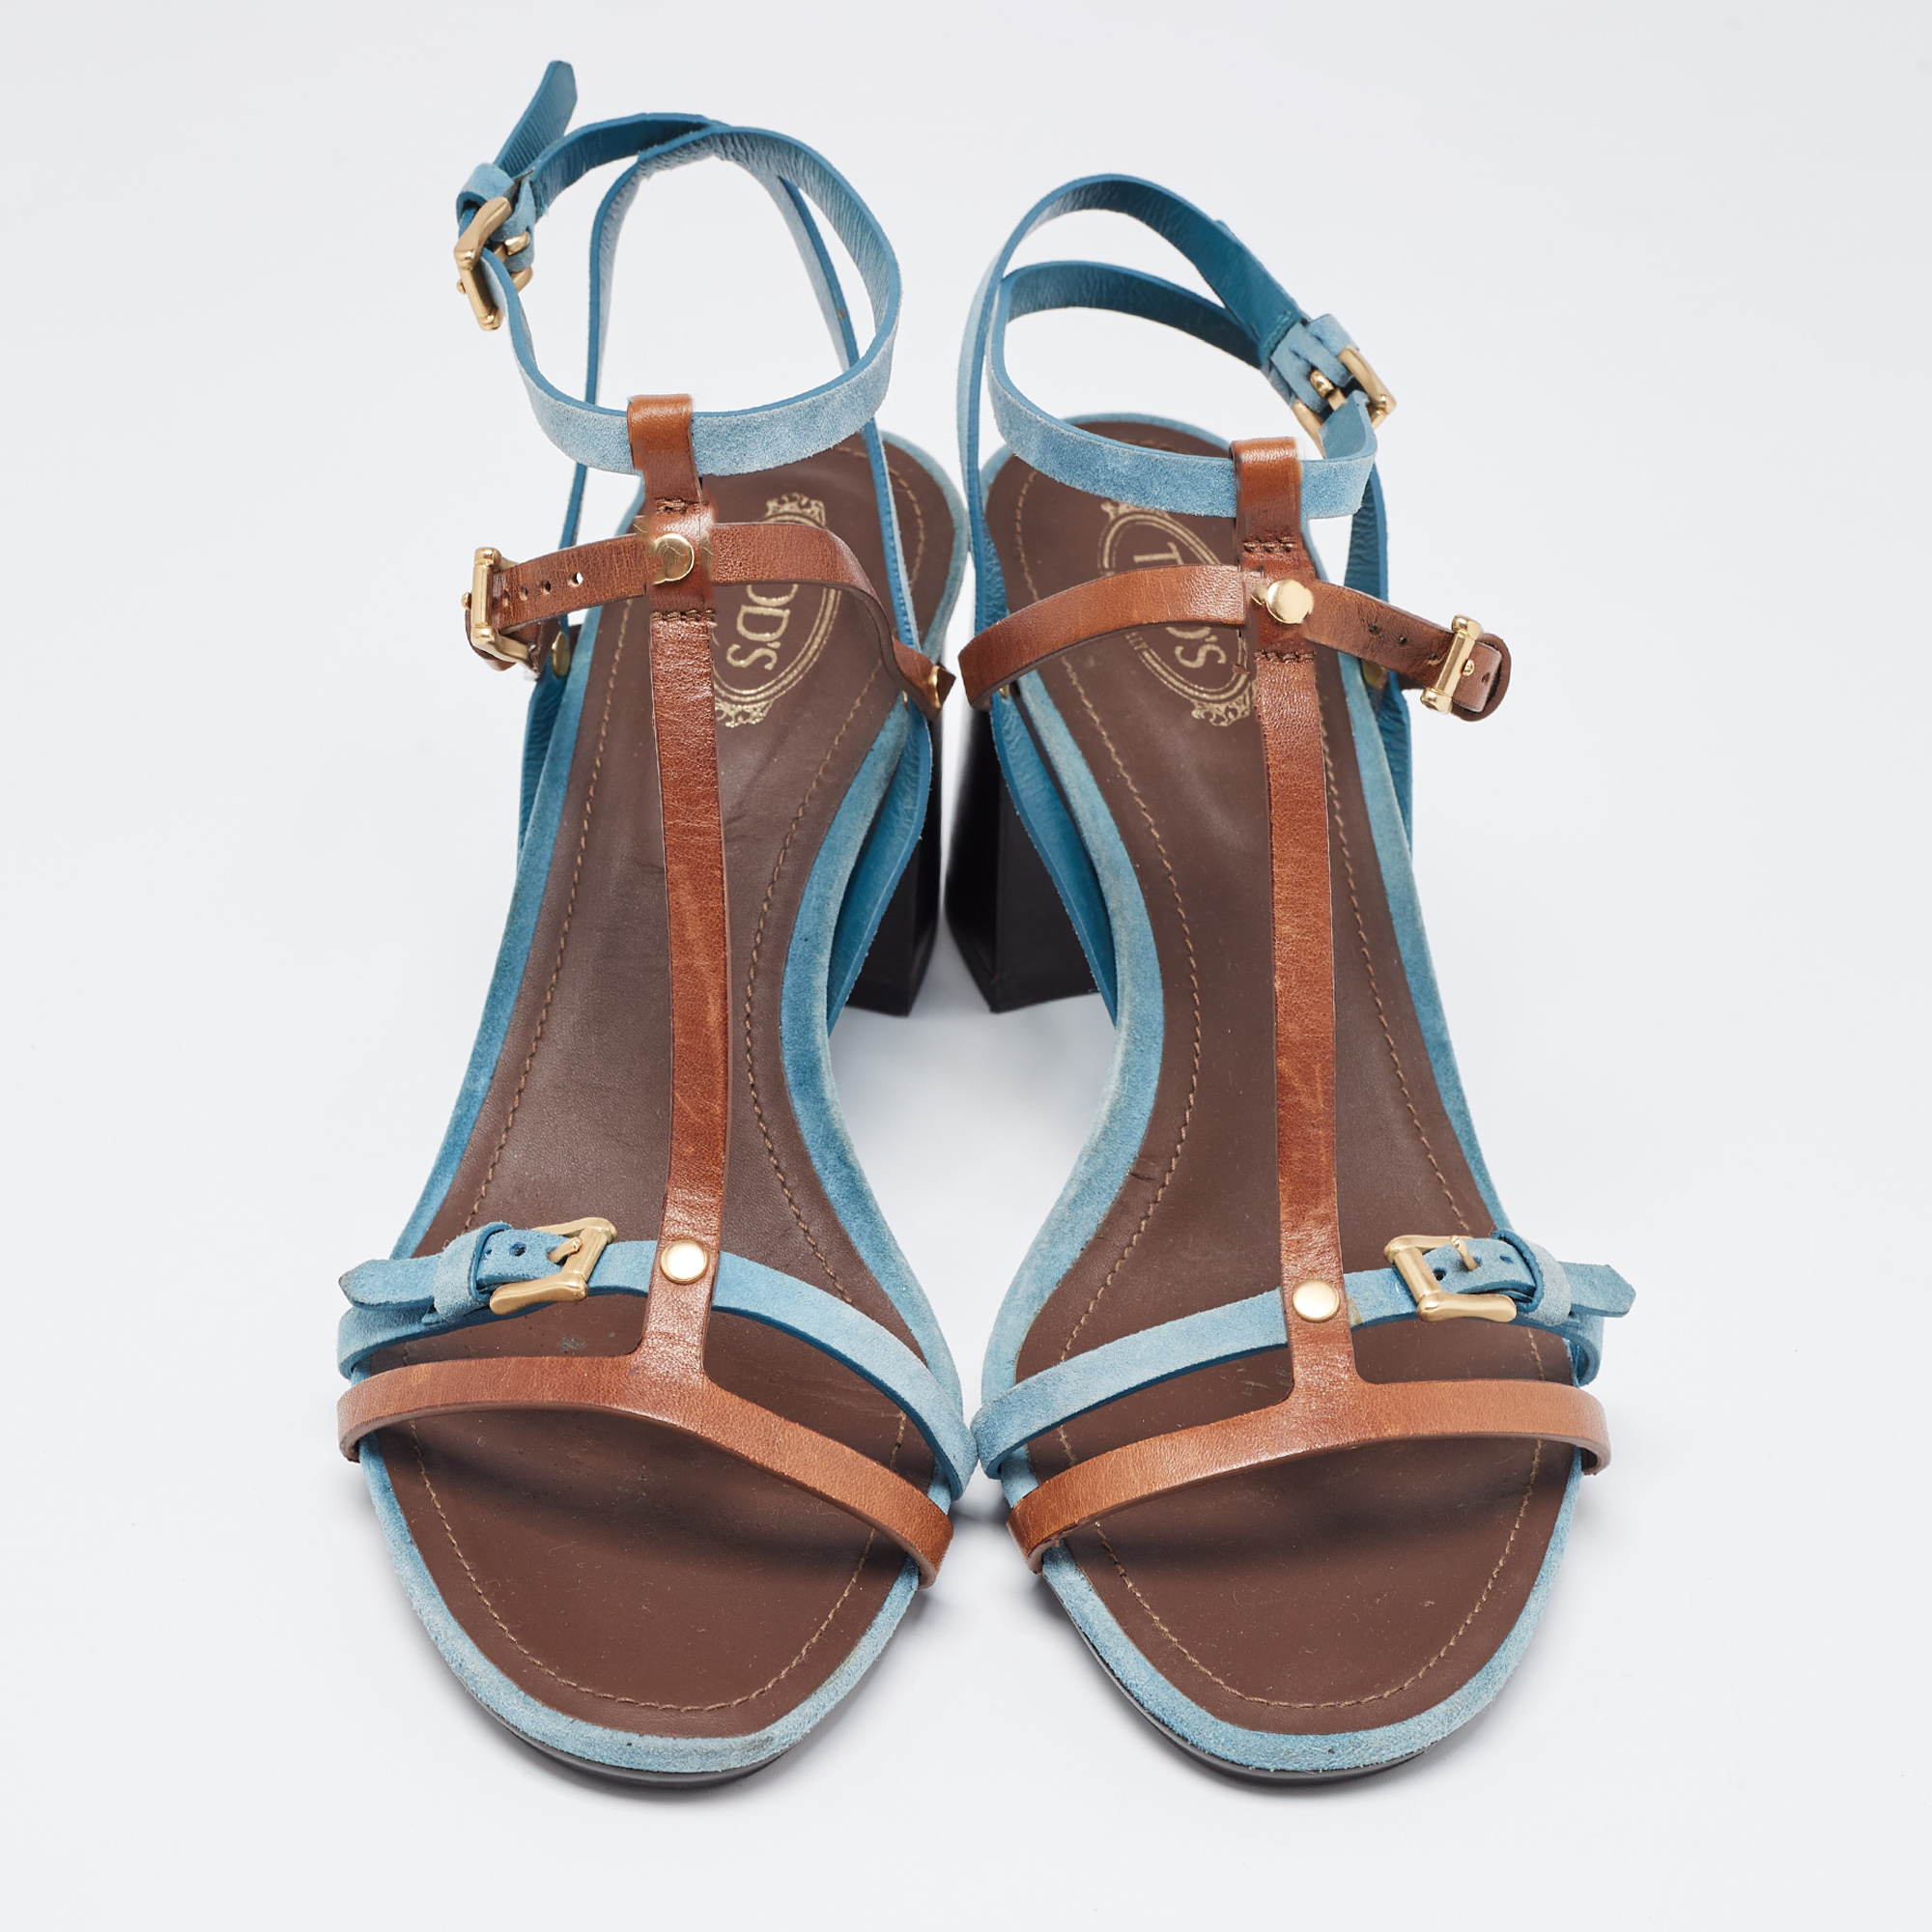 Tod's Blue/Brown Leather And Suede Buckle Cross Strap Sandals Size 39